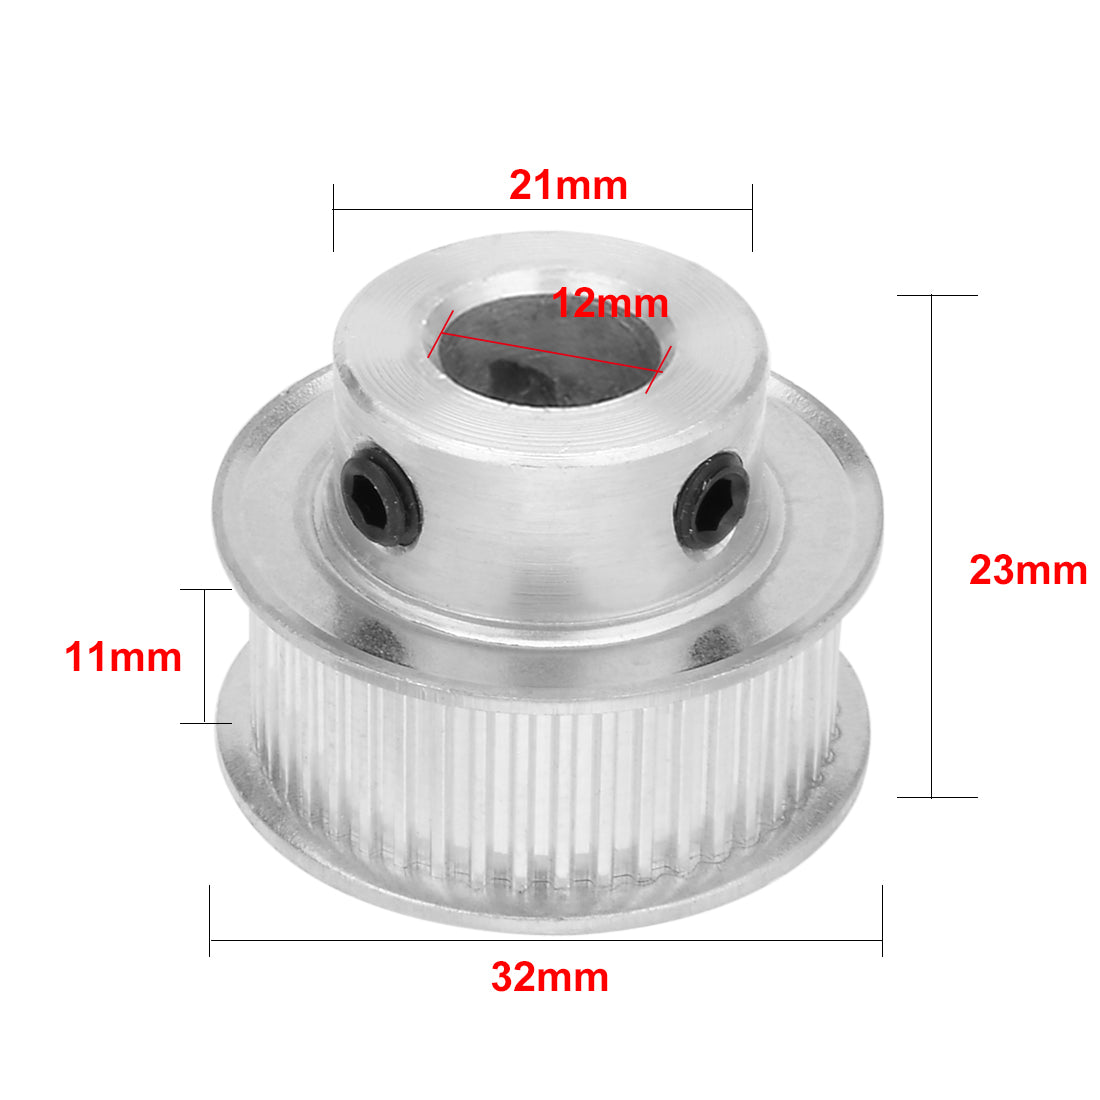 uxcell Uxcell Aluminum M-X-L 45 Teeth 12mm Bore Timing Belt Idler Pulley Synchronous Wheel 10mm Belt for 3D Printer CNC